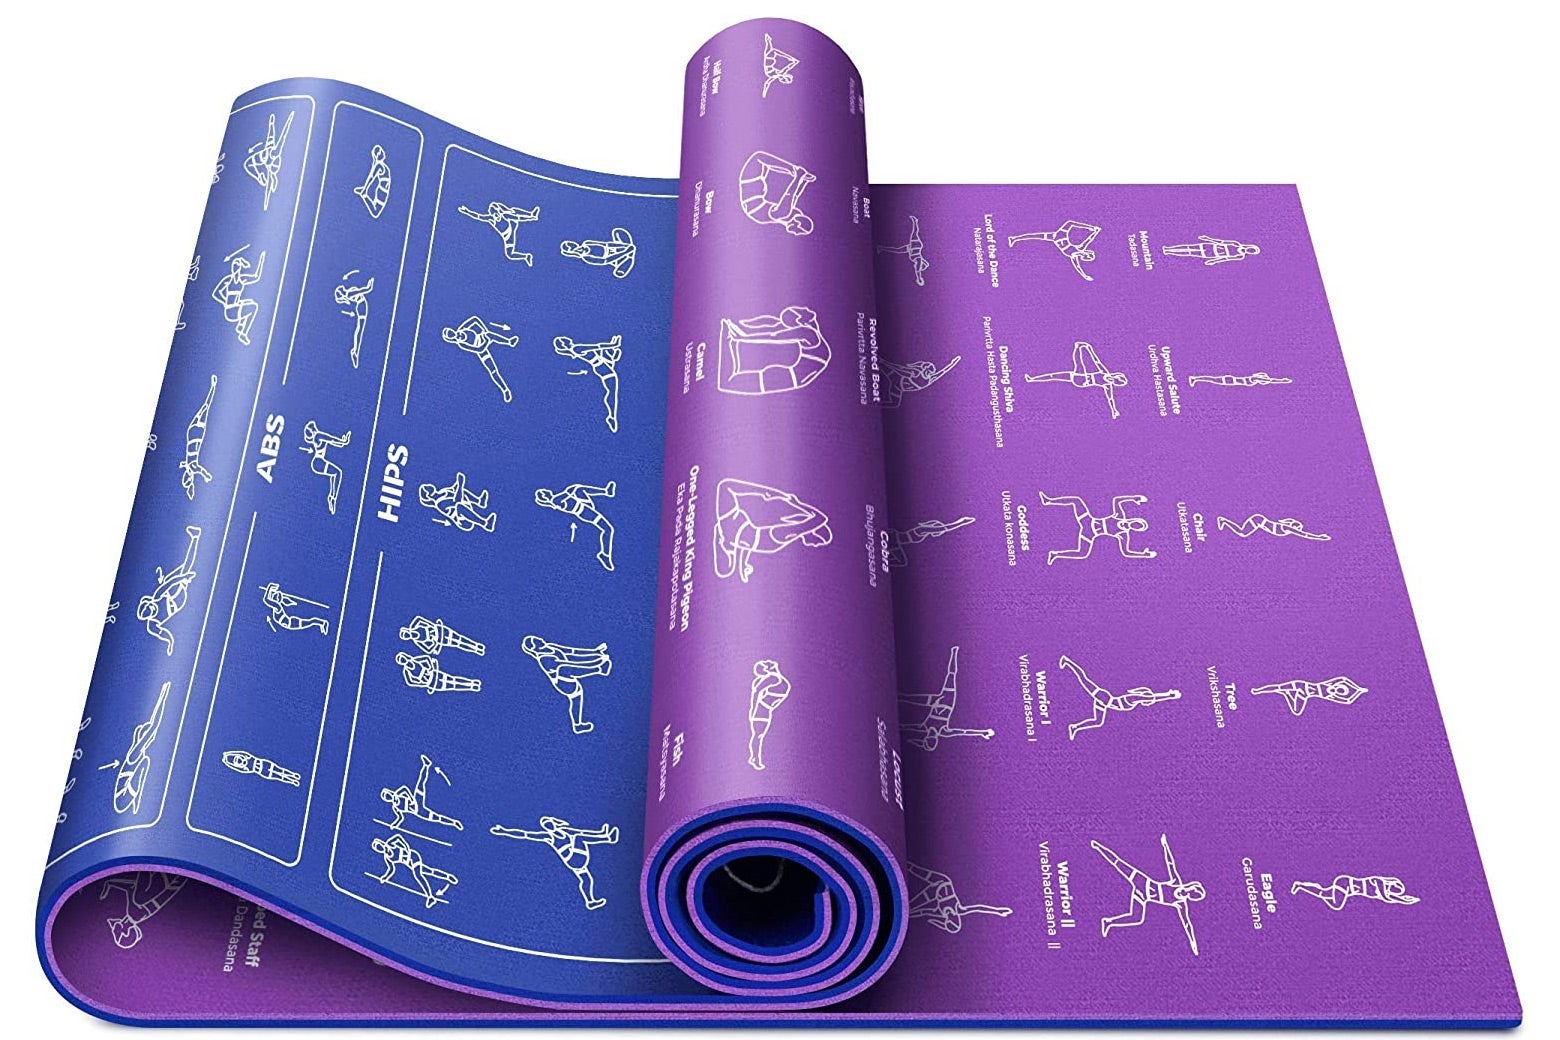 Yoga mat with poses and exercises printed on it